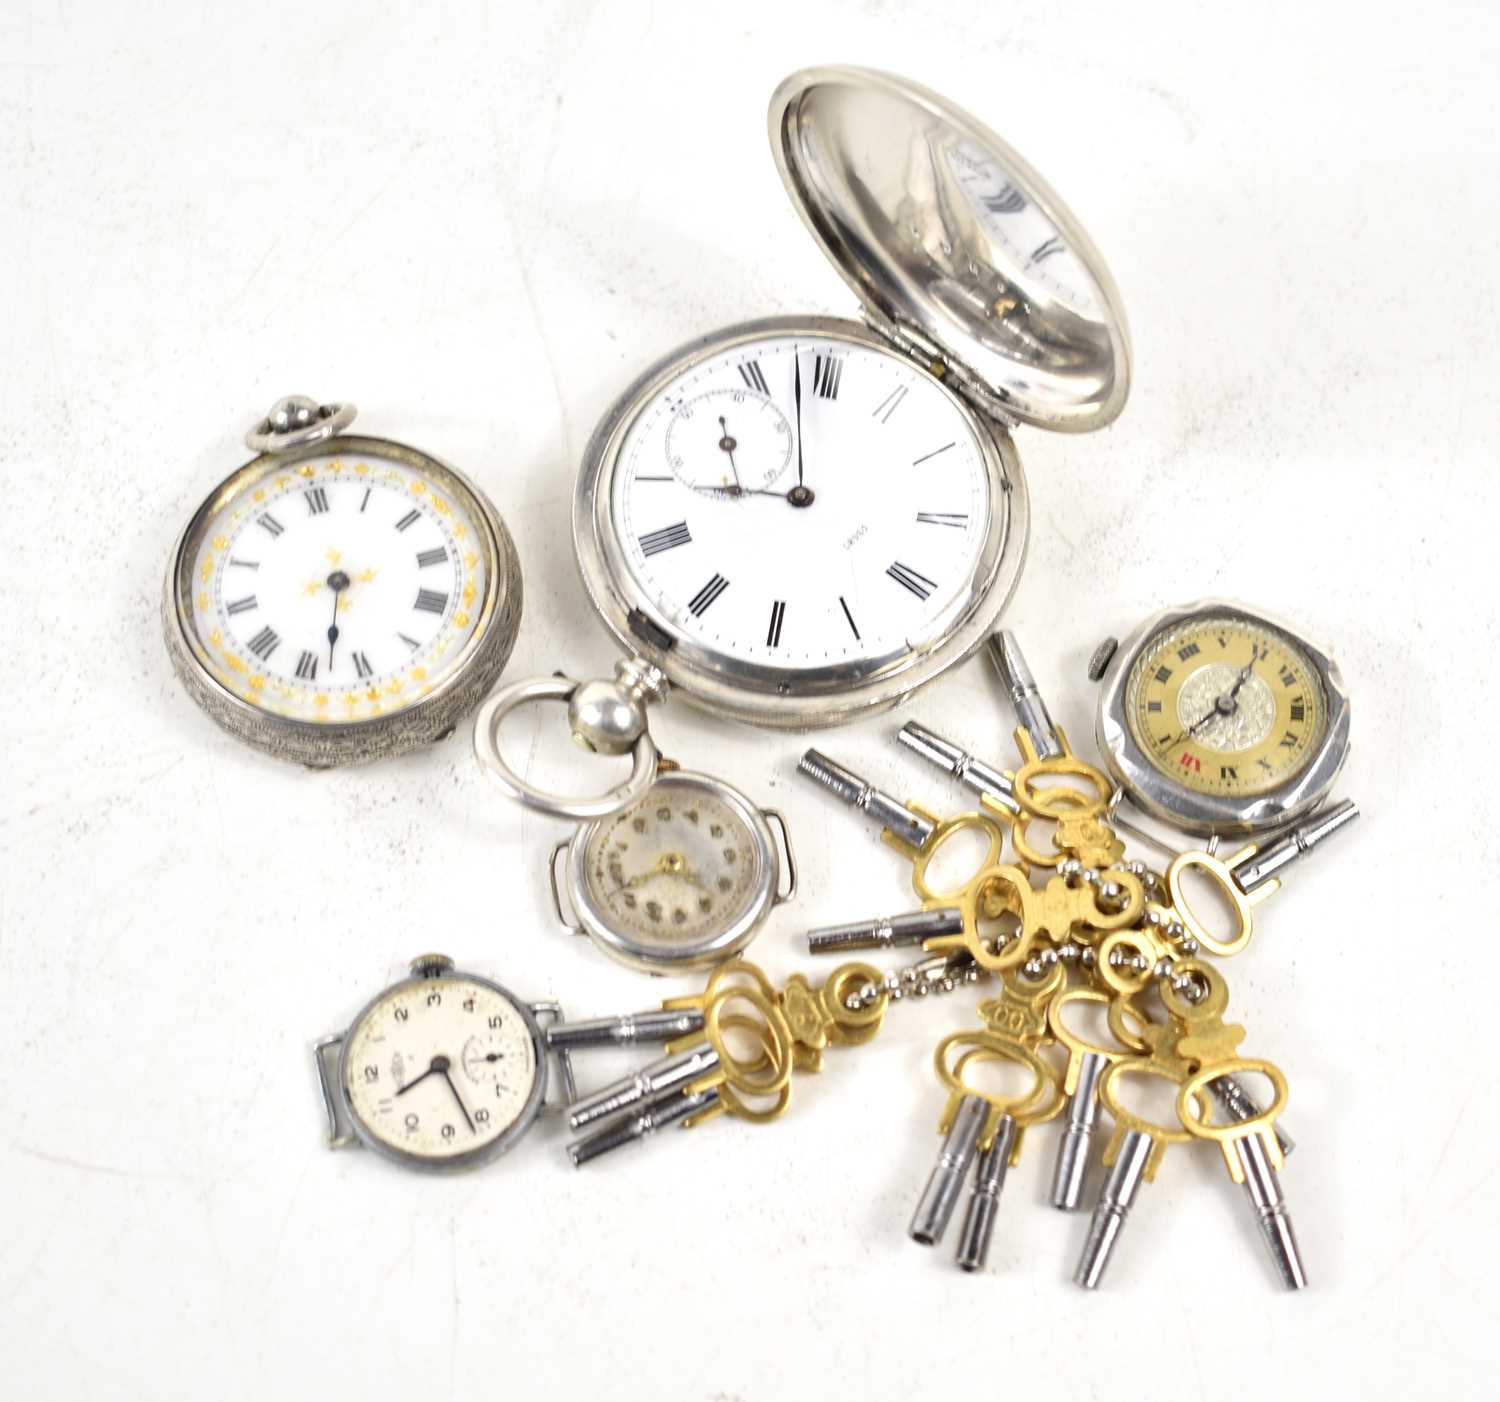 Five silver cased wrist and pocket watches, two having white enamel dials, together with a group